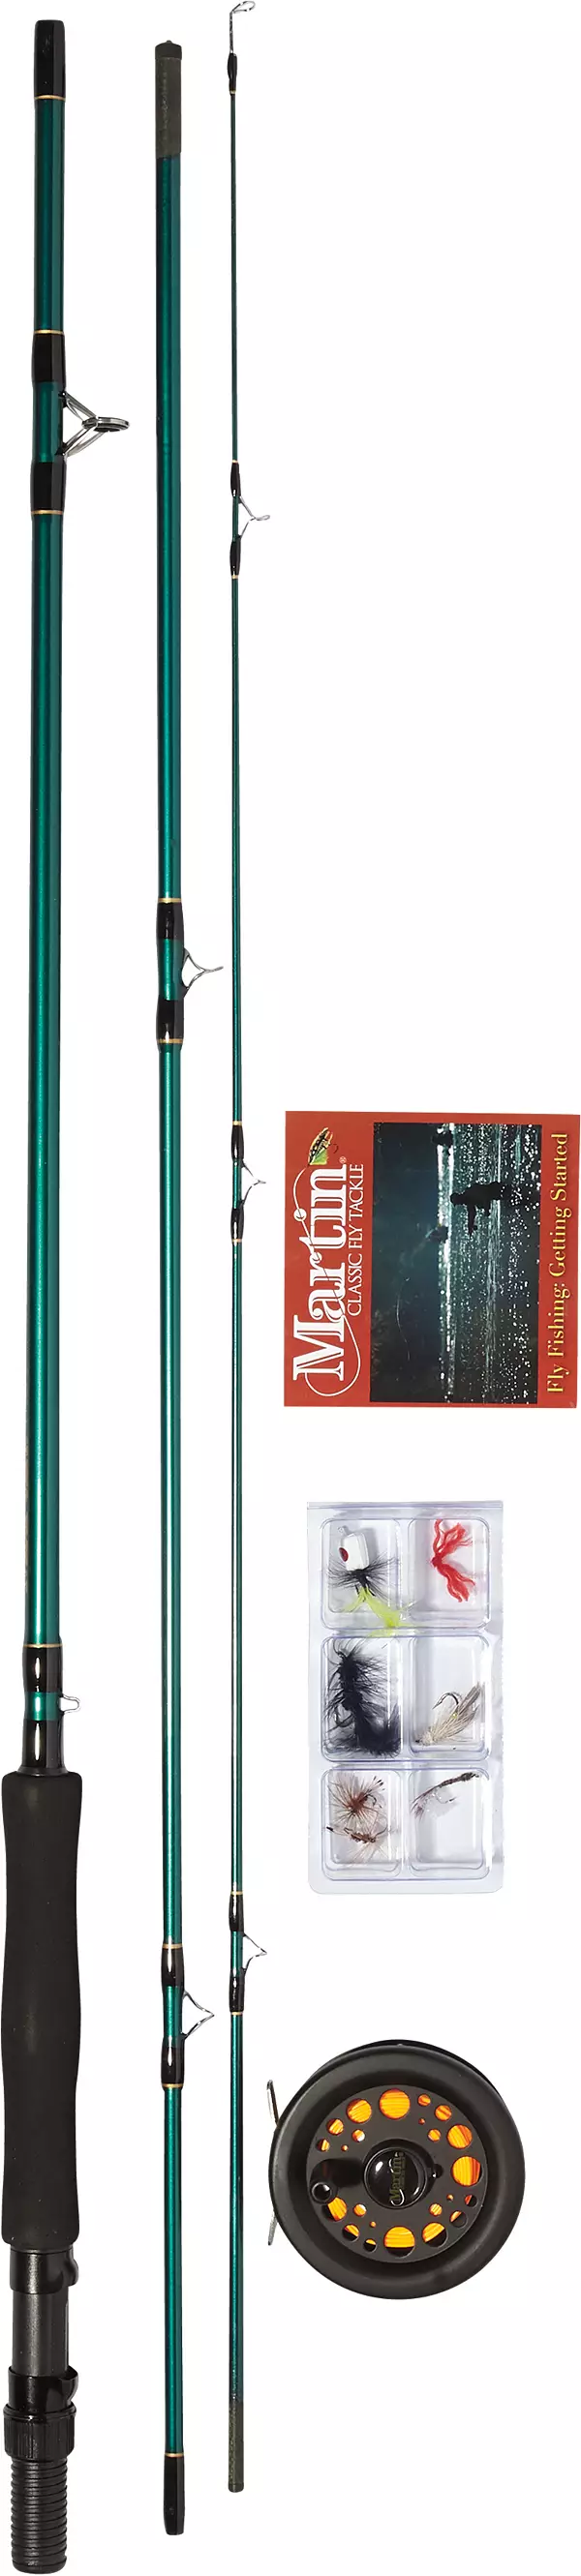 Martin Complete Fly Fishing Combo with Fly Assortment